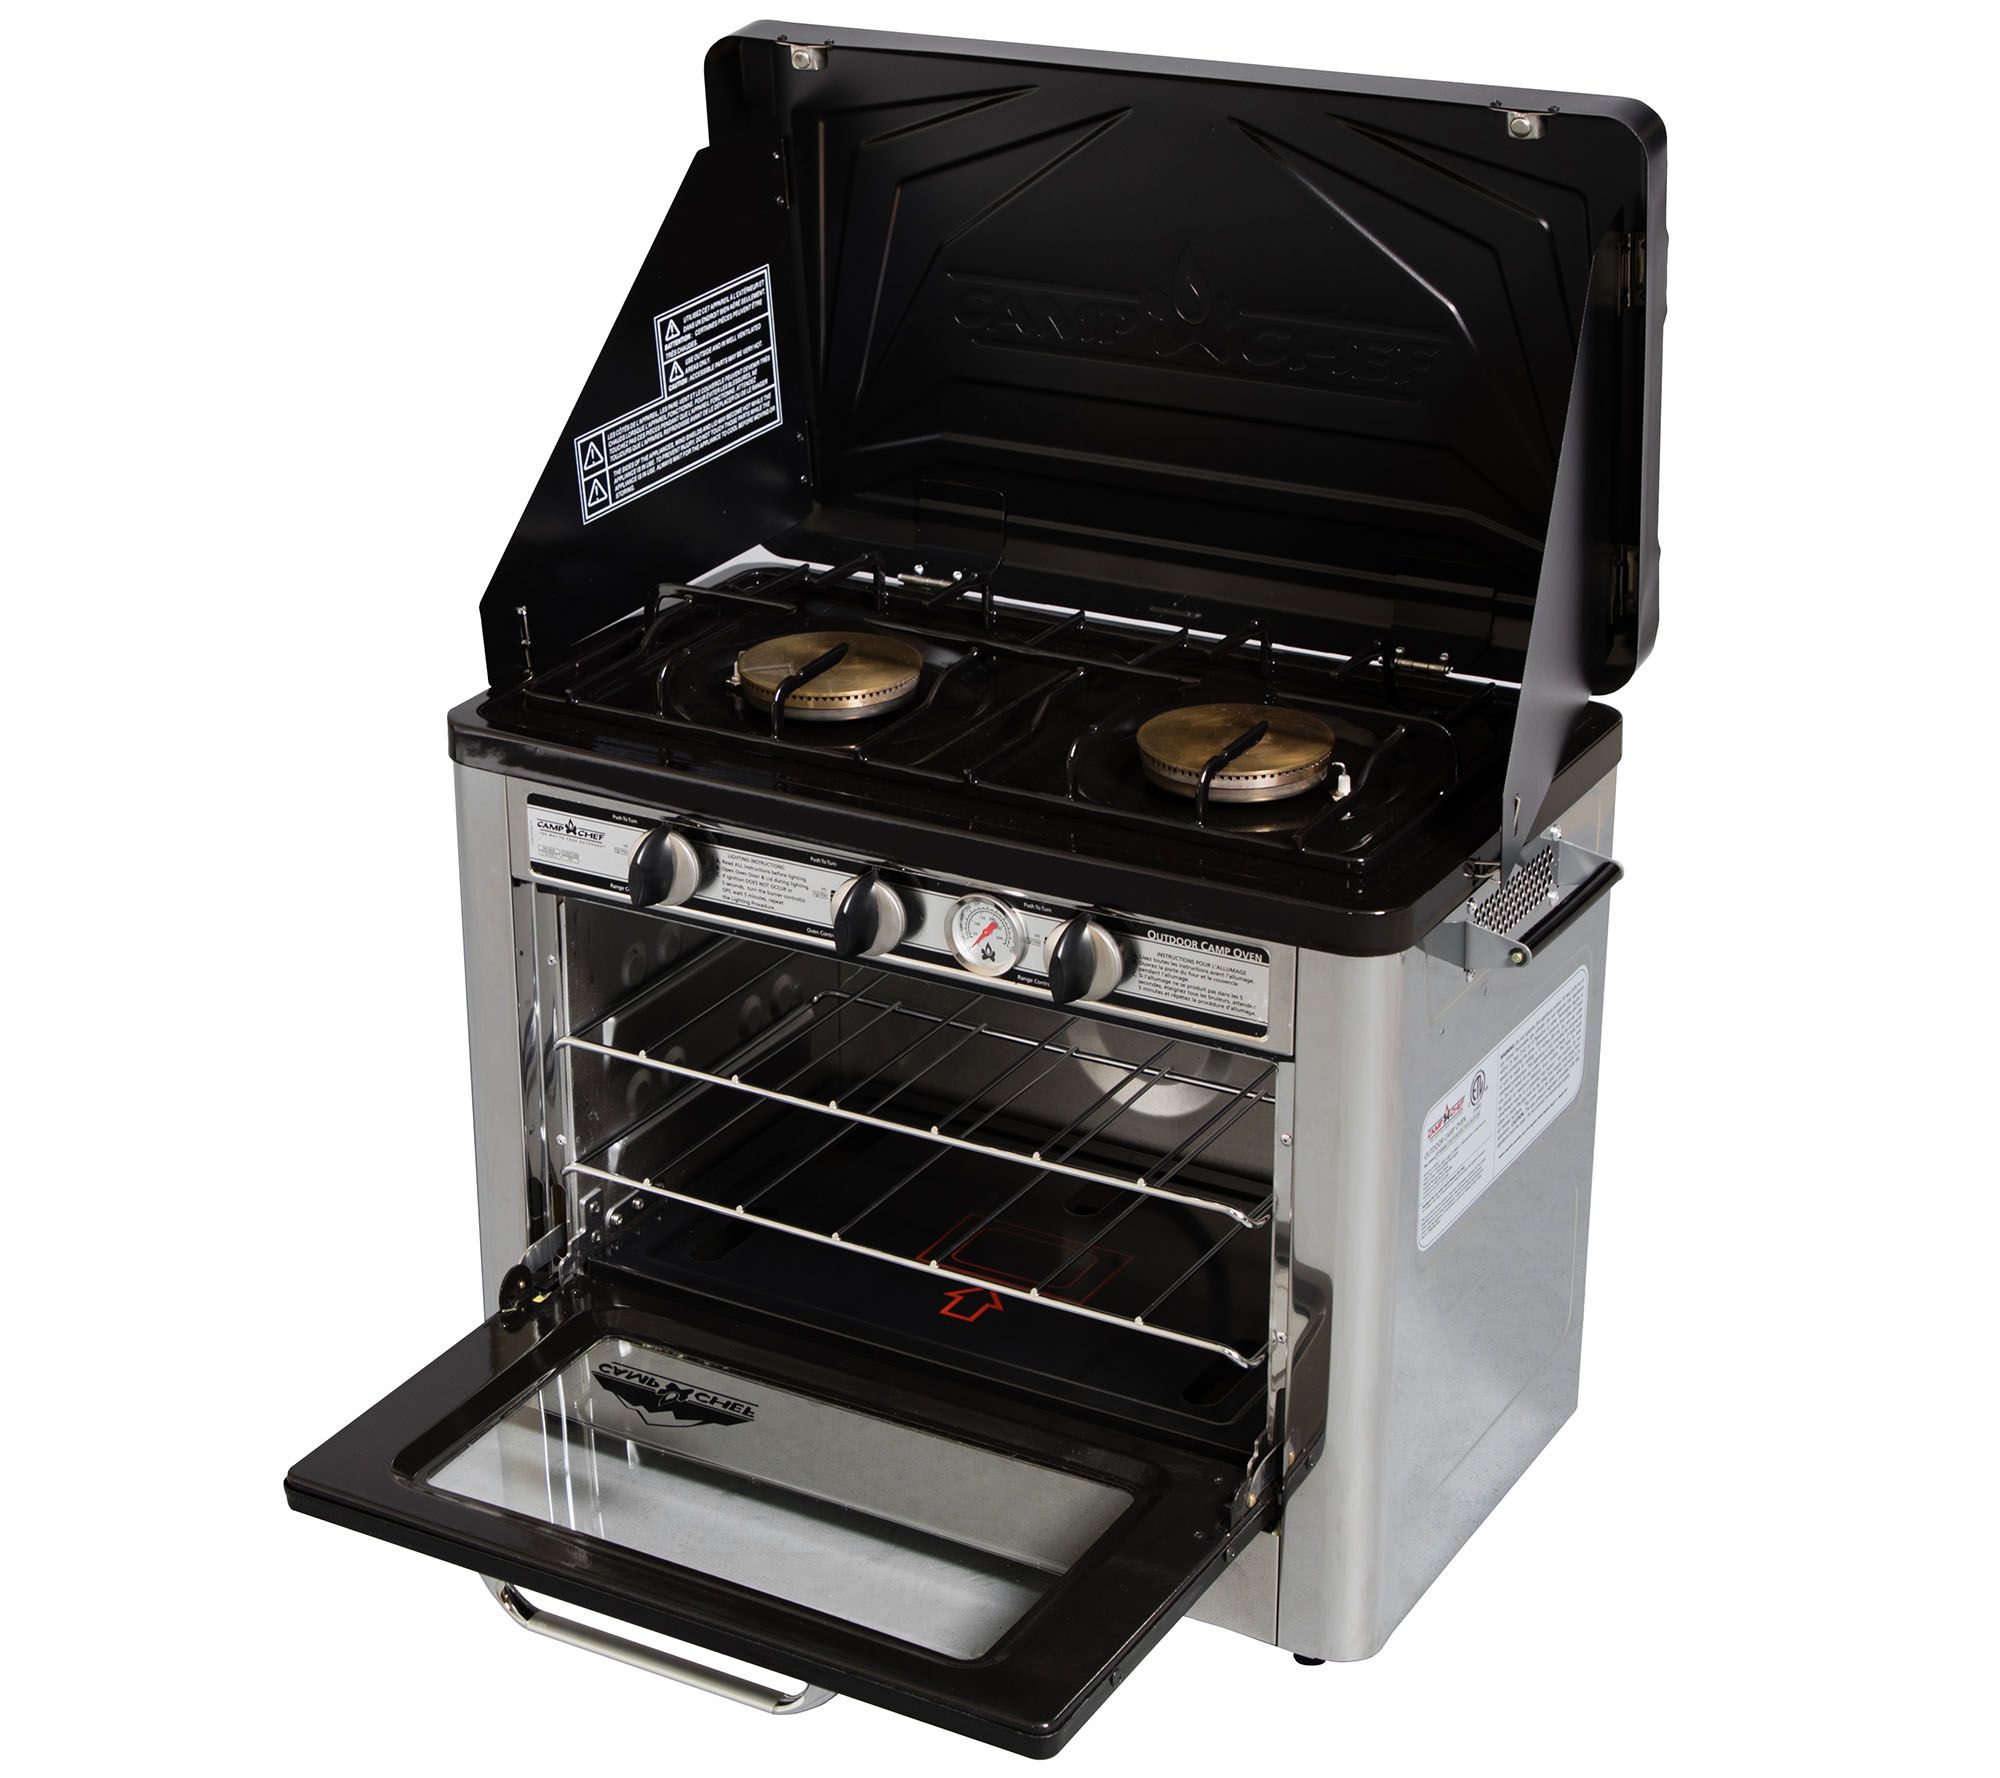 Camp Chef Deluxe Outdoor Oven Qvc Com